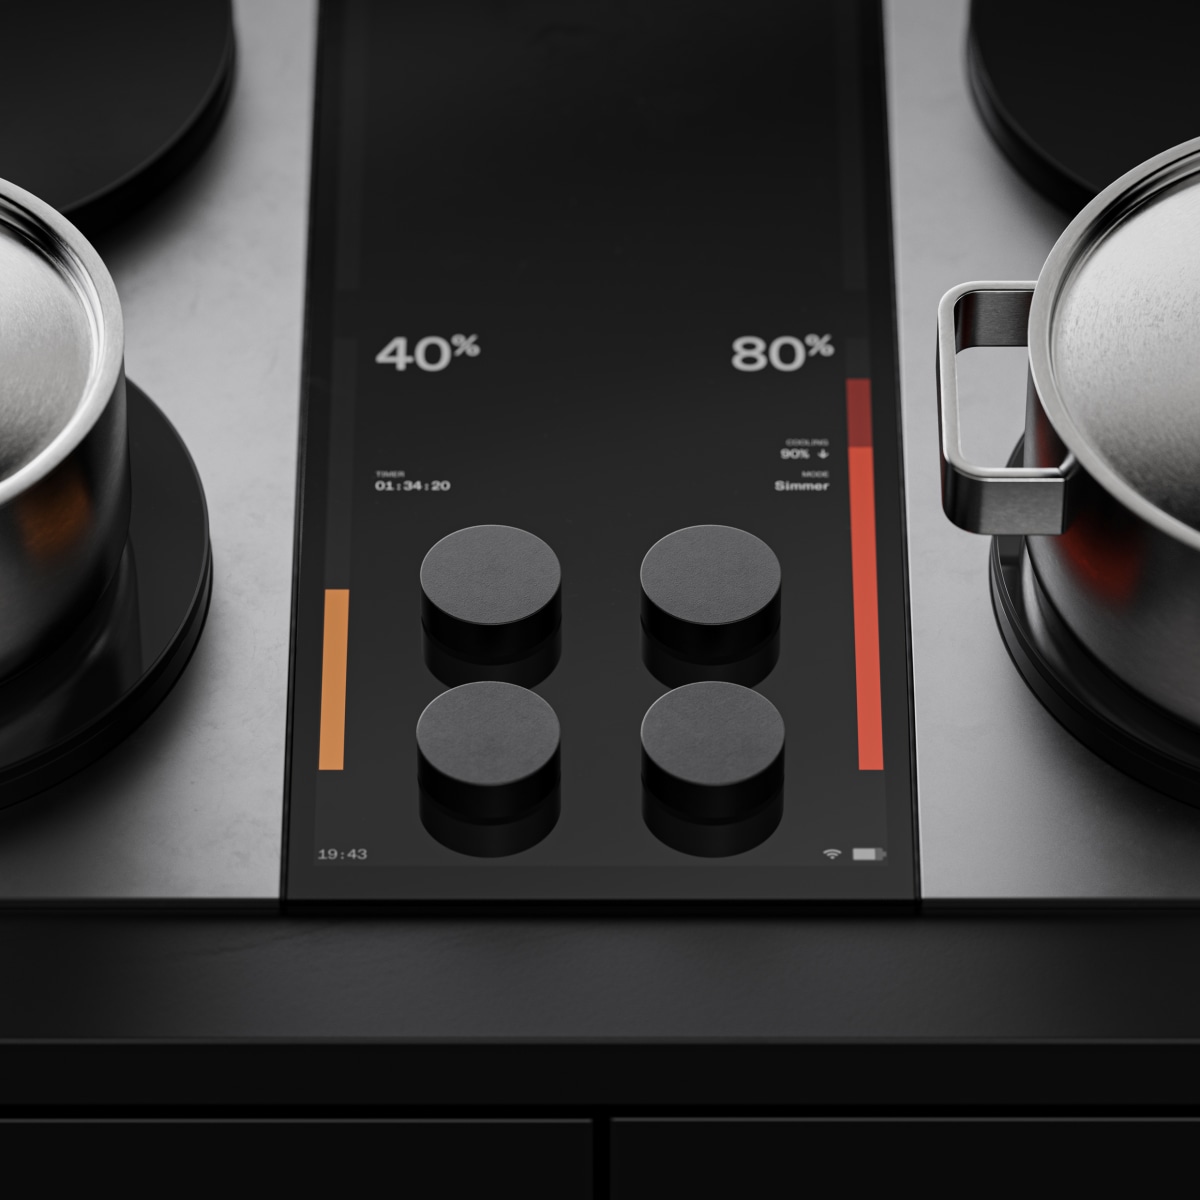 4 Best Induction Cooktops in 2022